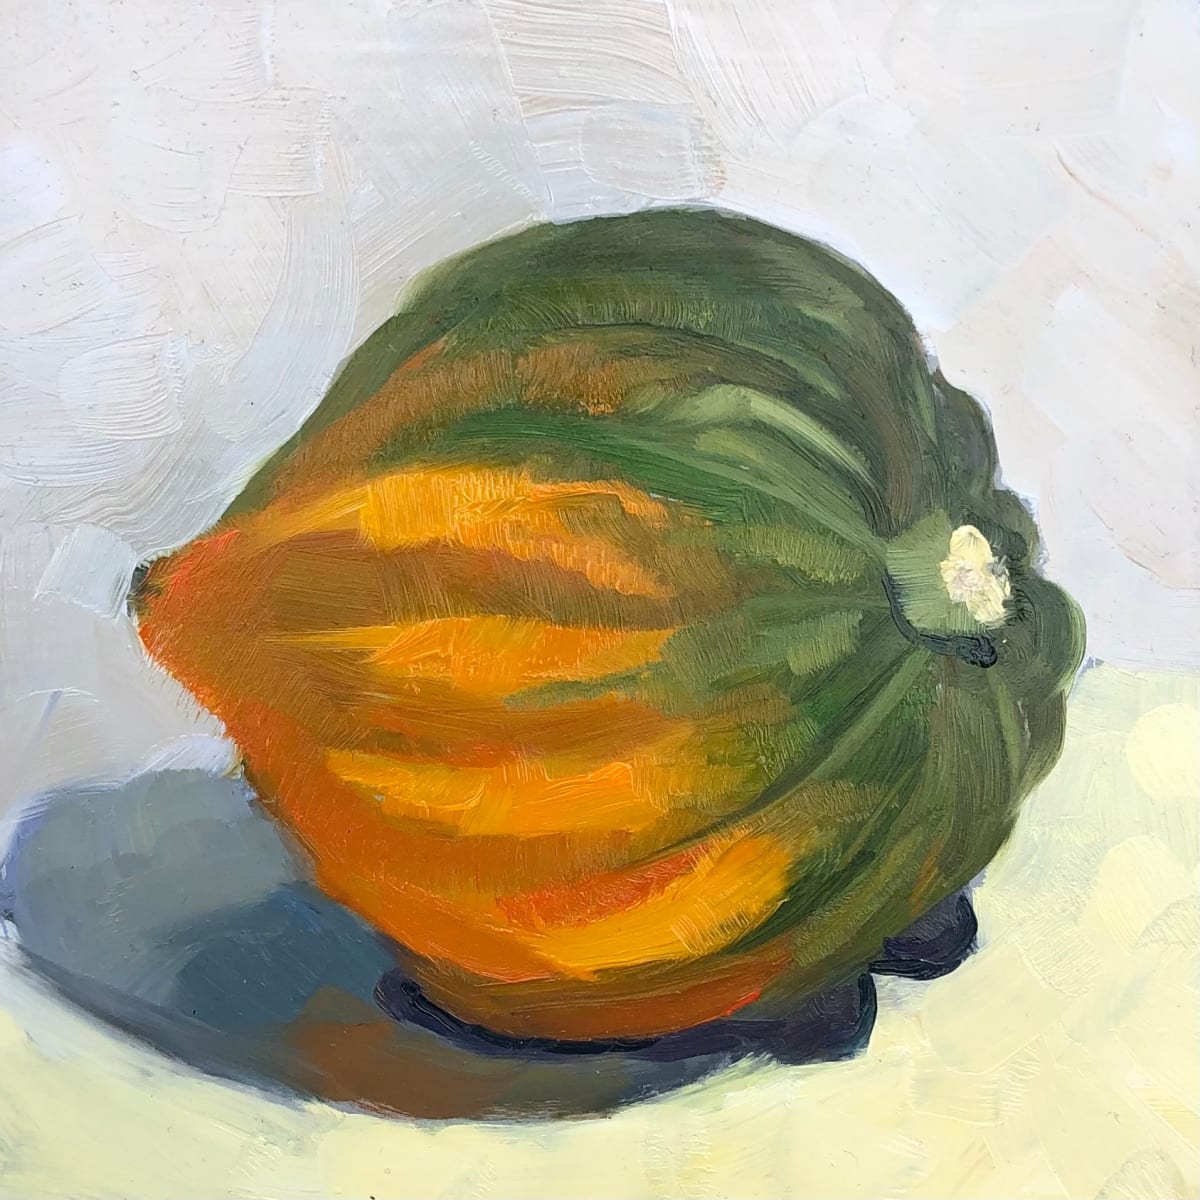 Acorn Squash by Cary Galbraith  Image: Eat vegetables. Eat them often. Eat them for breakfast, lunch and dinner. You may not like this kind but there are hundreds of vegetables to choose from.